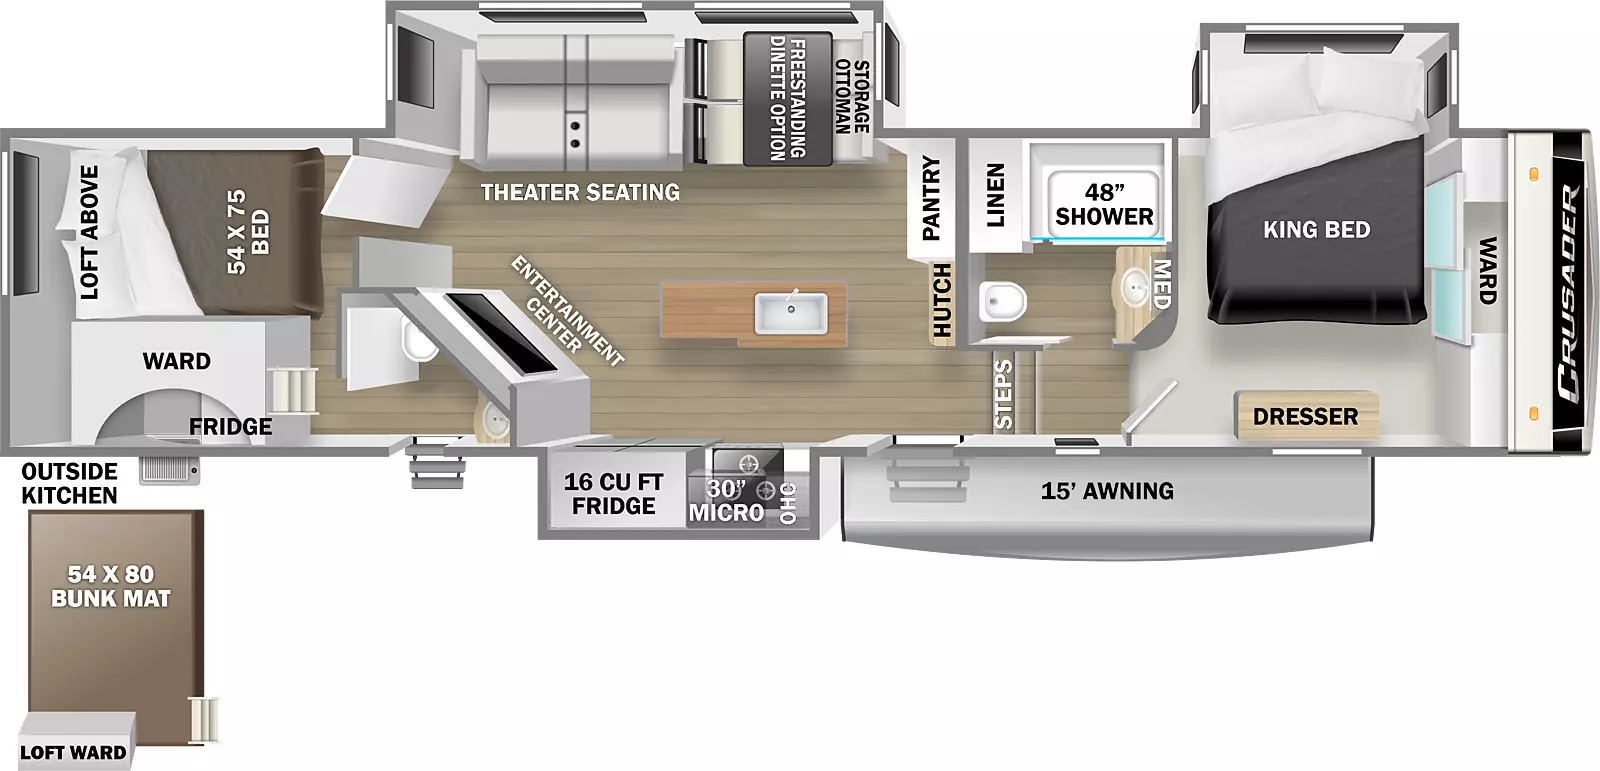 The Crusader 395BHL has two entry doors, a 15' awning, outside kitchen, and three slideouts, one on the door side and two on the off-door side. Inside the unit is a front bedroom with slideout, king bed, wardrobe closet, and dresser. The bedroom door opens to a hallway with two steps leading down into the main living area. On the right of the hallway is the bathroom with a 48" shower, linen closet, commode, and sink with medicine cabinet. Standing at the bottom of the steps and facing the rear, there is a hutch and pantry. Stepping into the main living area, there is a kitchen island with butcher block top and sink near the center of the room. The right-hand wall is a slideout containing a booth dinette with the option for a free-standing dinette, a storage ottoman, and theater seating. Across from the theater seating is an angled entertainment center that faces the opposite wall. The left wall is a kitchen slideout with cooktop and oven, 12 cubic foot refrigerator, and 30" microwave and cabinets mounted overhead. There is a doorway at the rear that opens into a bunk room with a half bath on the left. The bunk room holds a 54" x 75" bed and wardrobe. A ladder provides access to an overhead loft with a 54" x 80" bunk mat and wardrobe. 